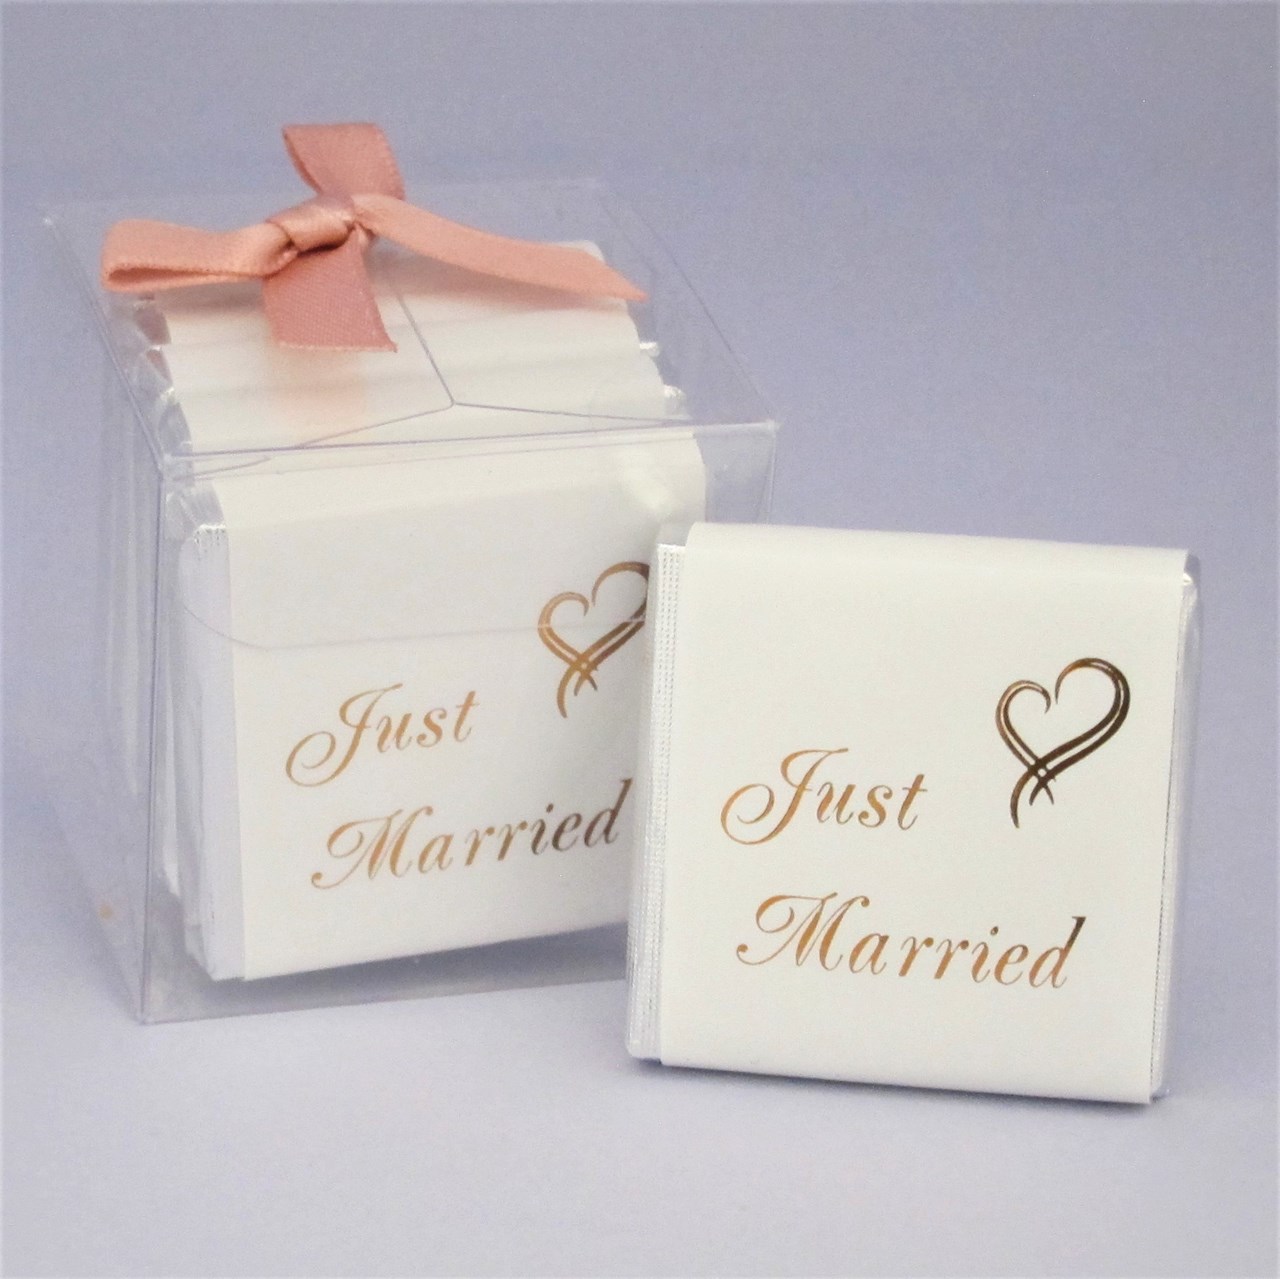 Just Married Gift Box  Married gift, Just married, Gifts